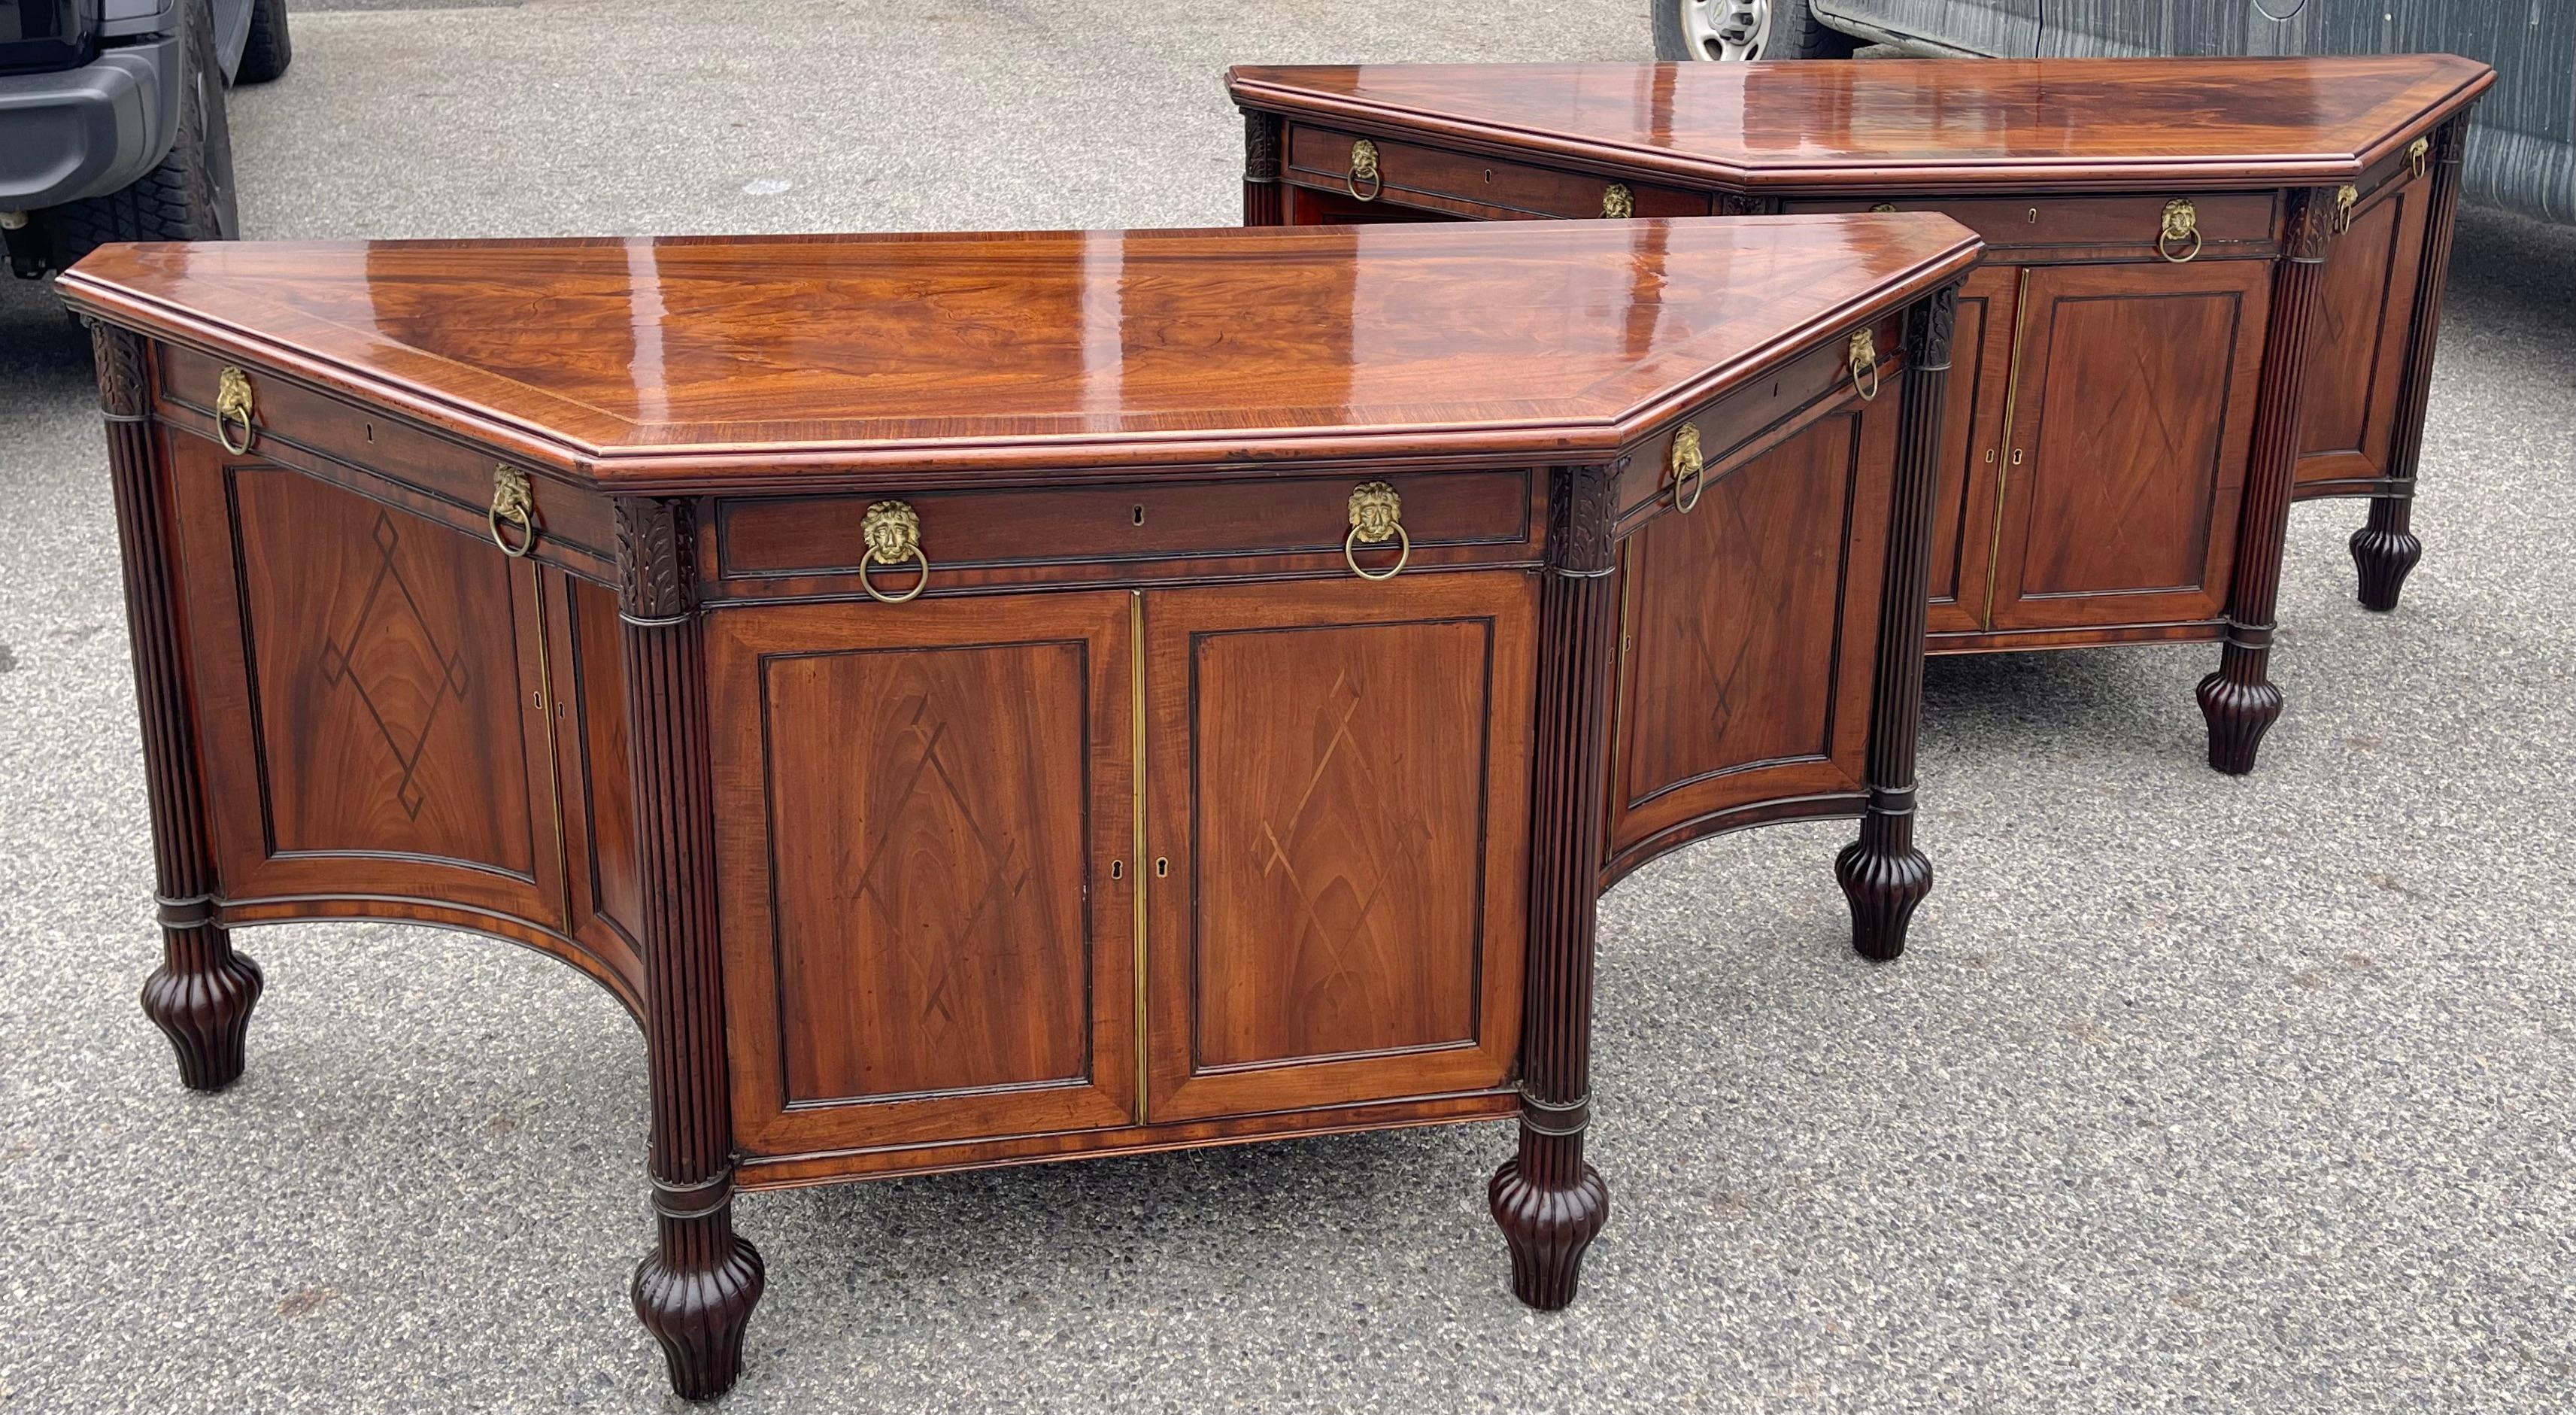 Rare pair of Regency or Late Georgian Inlaid Mahogany sideboard cabinets. Wonderful trapezoidal form with concave side doors and interior shelving. Drawers with original lion pulls. Reeded columns and amphora feet.

Provenance: Winter Antique